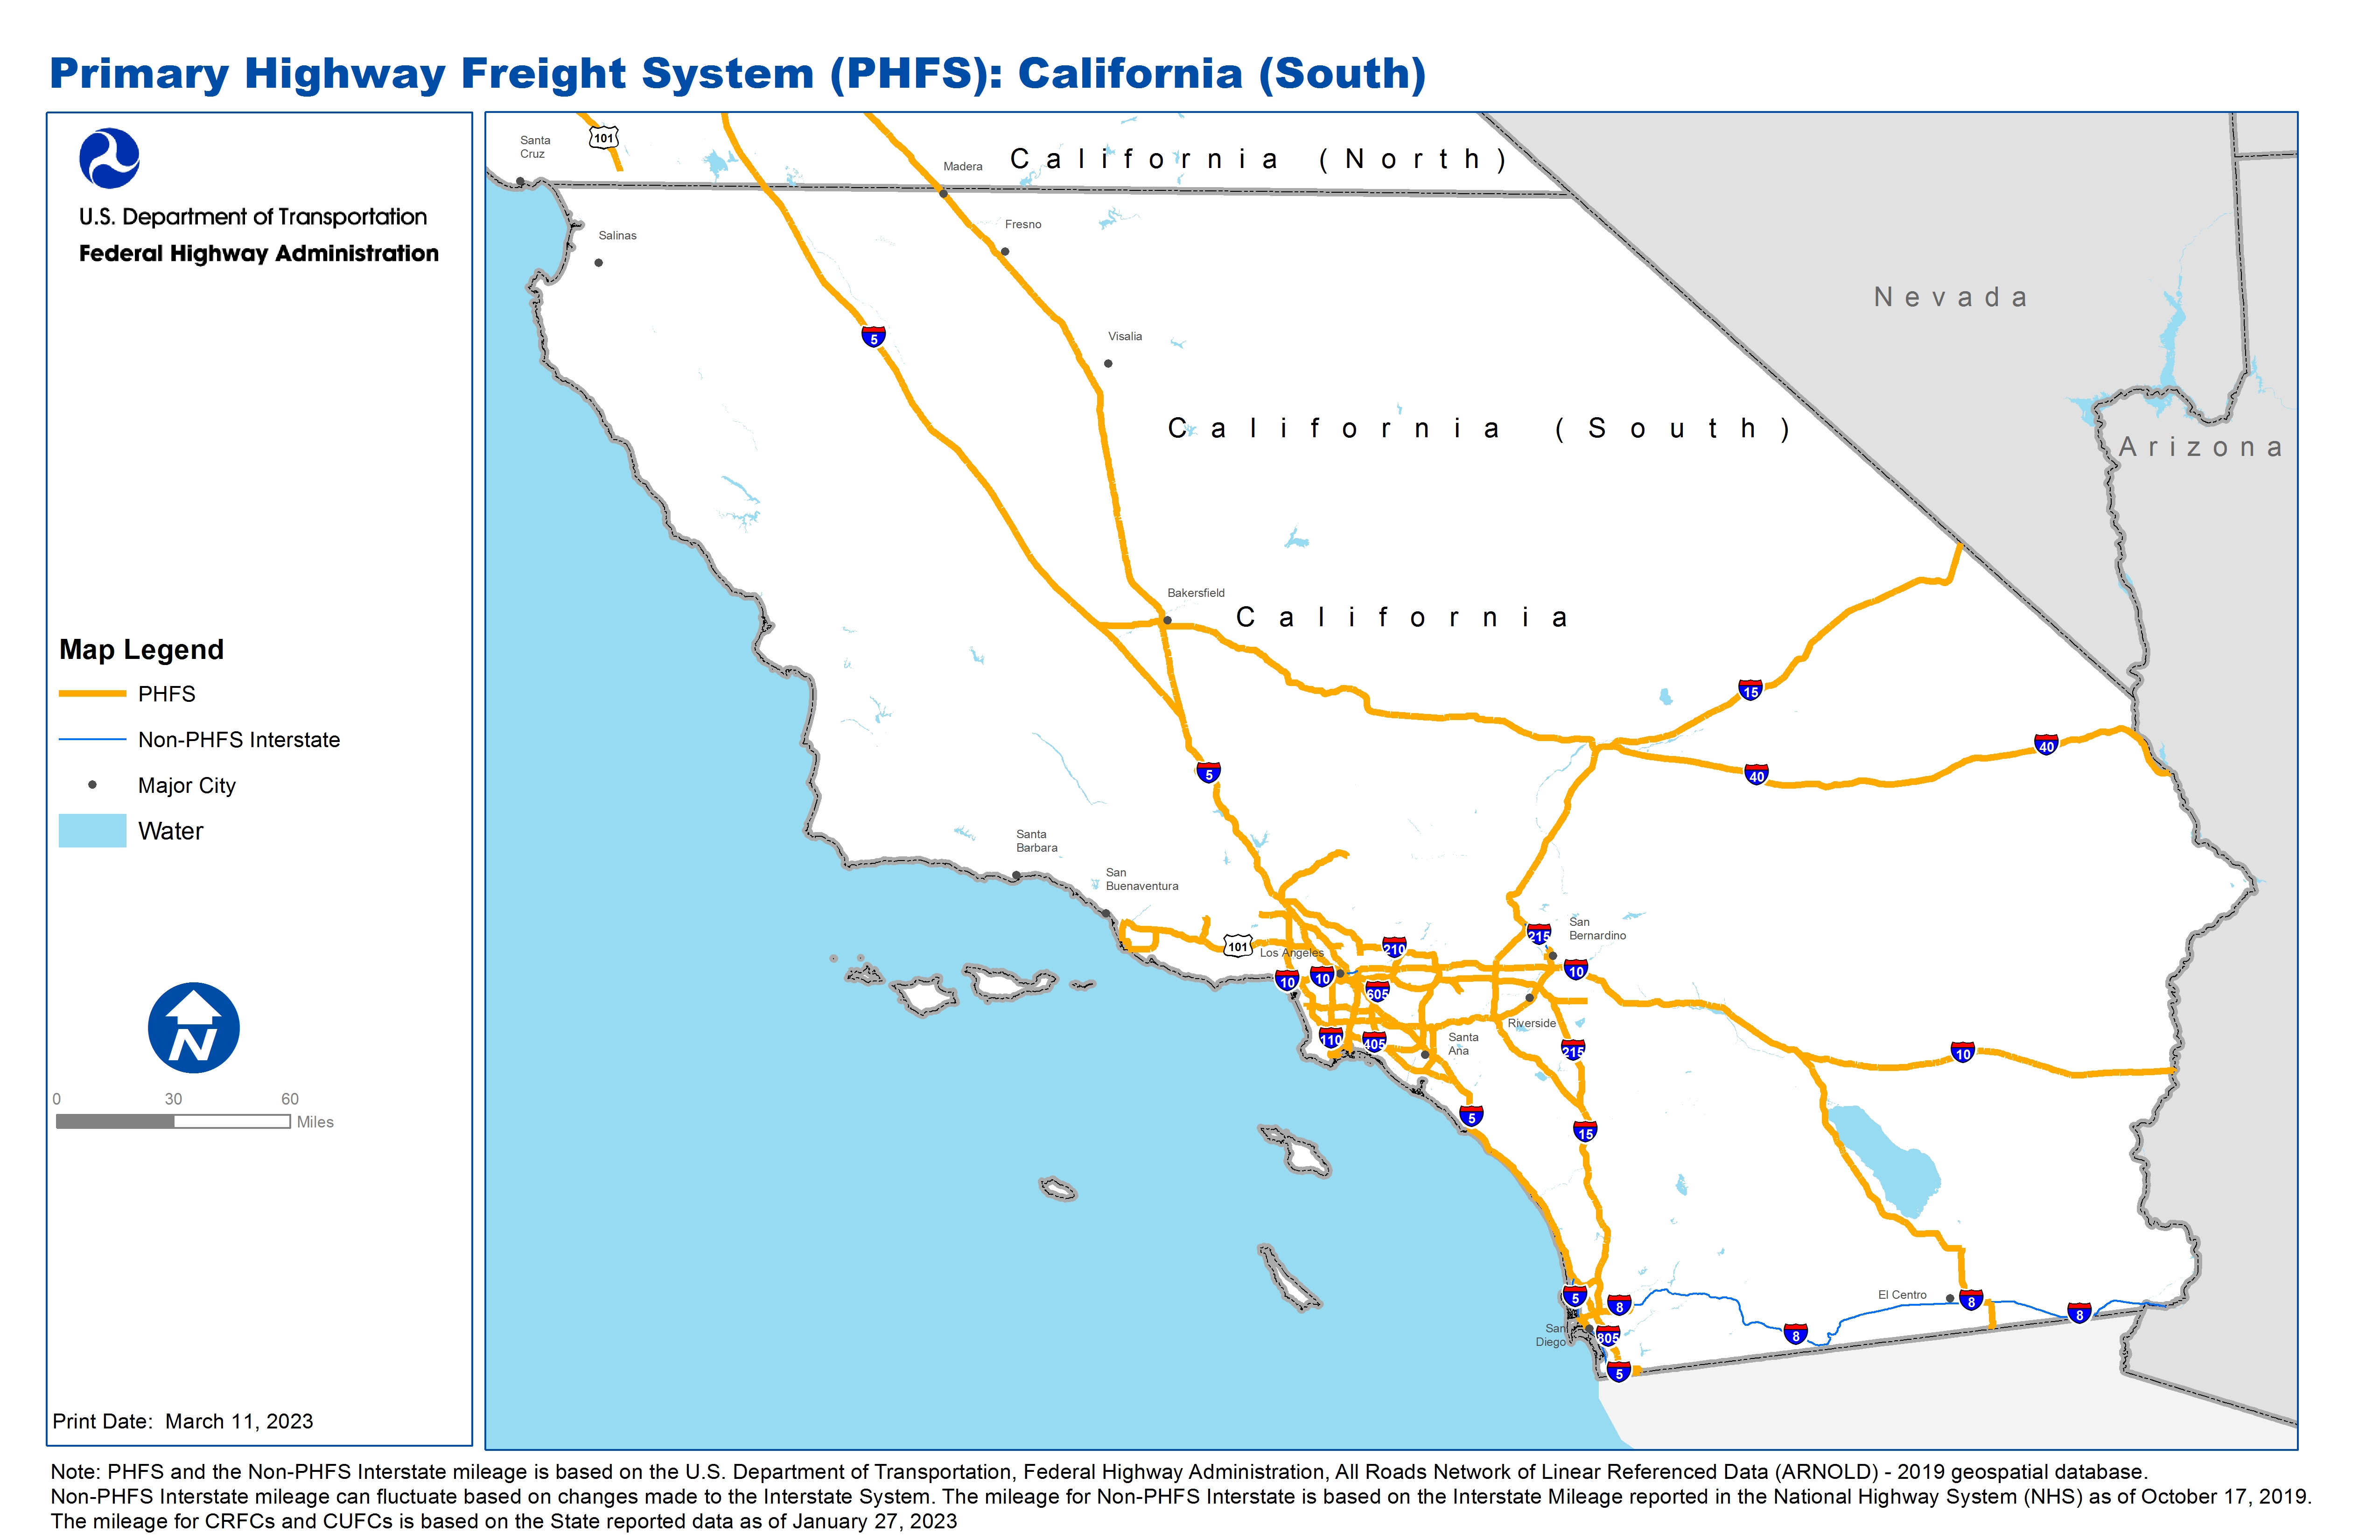 This map of southern California's National Highway Freight Network includes the Primary Highway Freight System and all the Interstates running through the state that are not part of the Primary Highway Freight System.